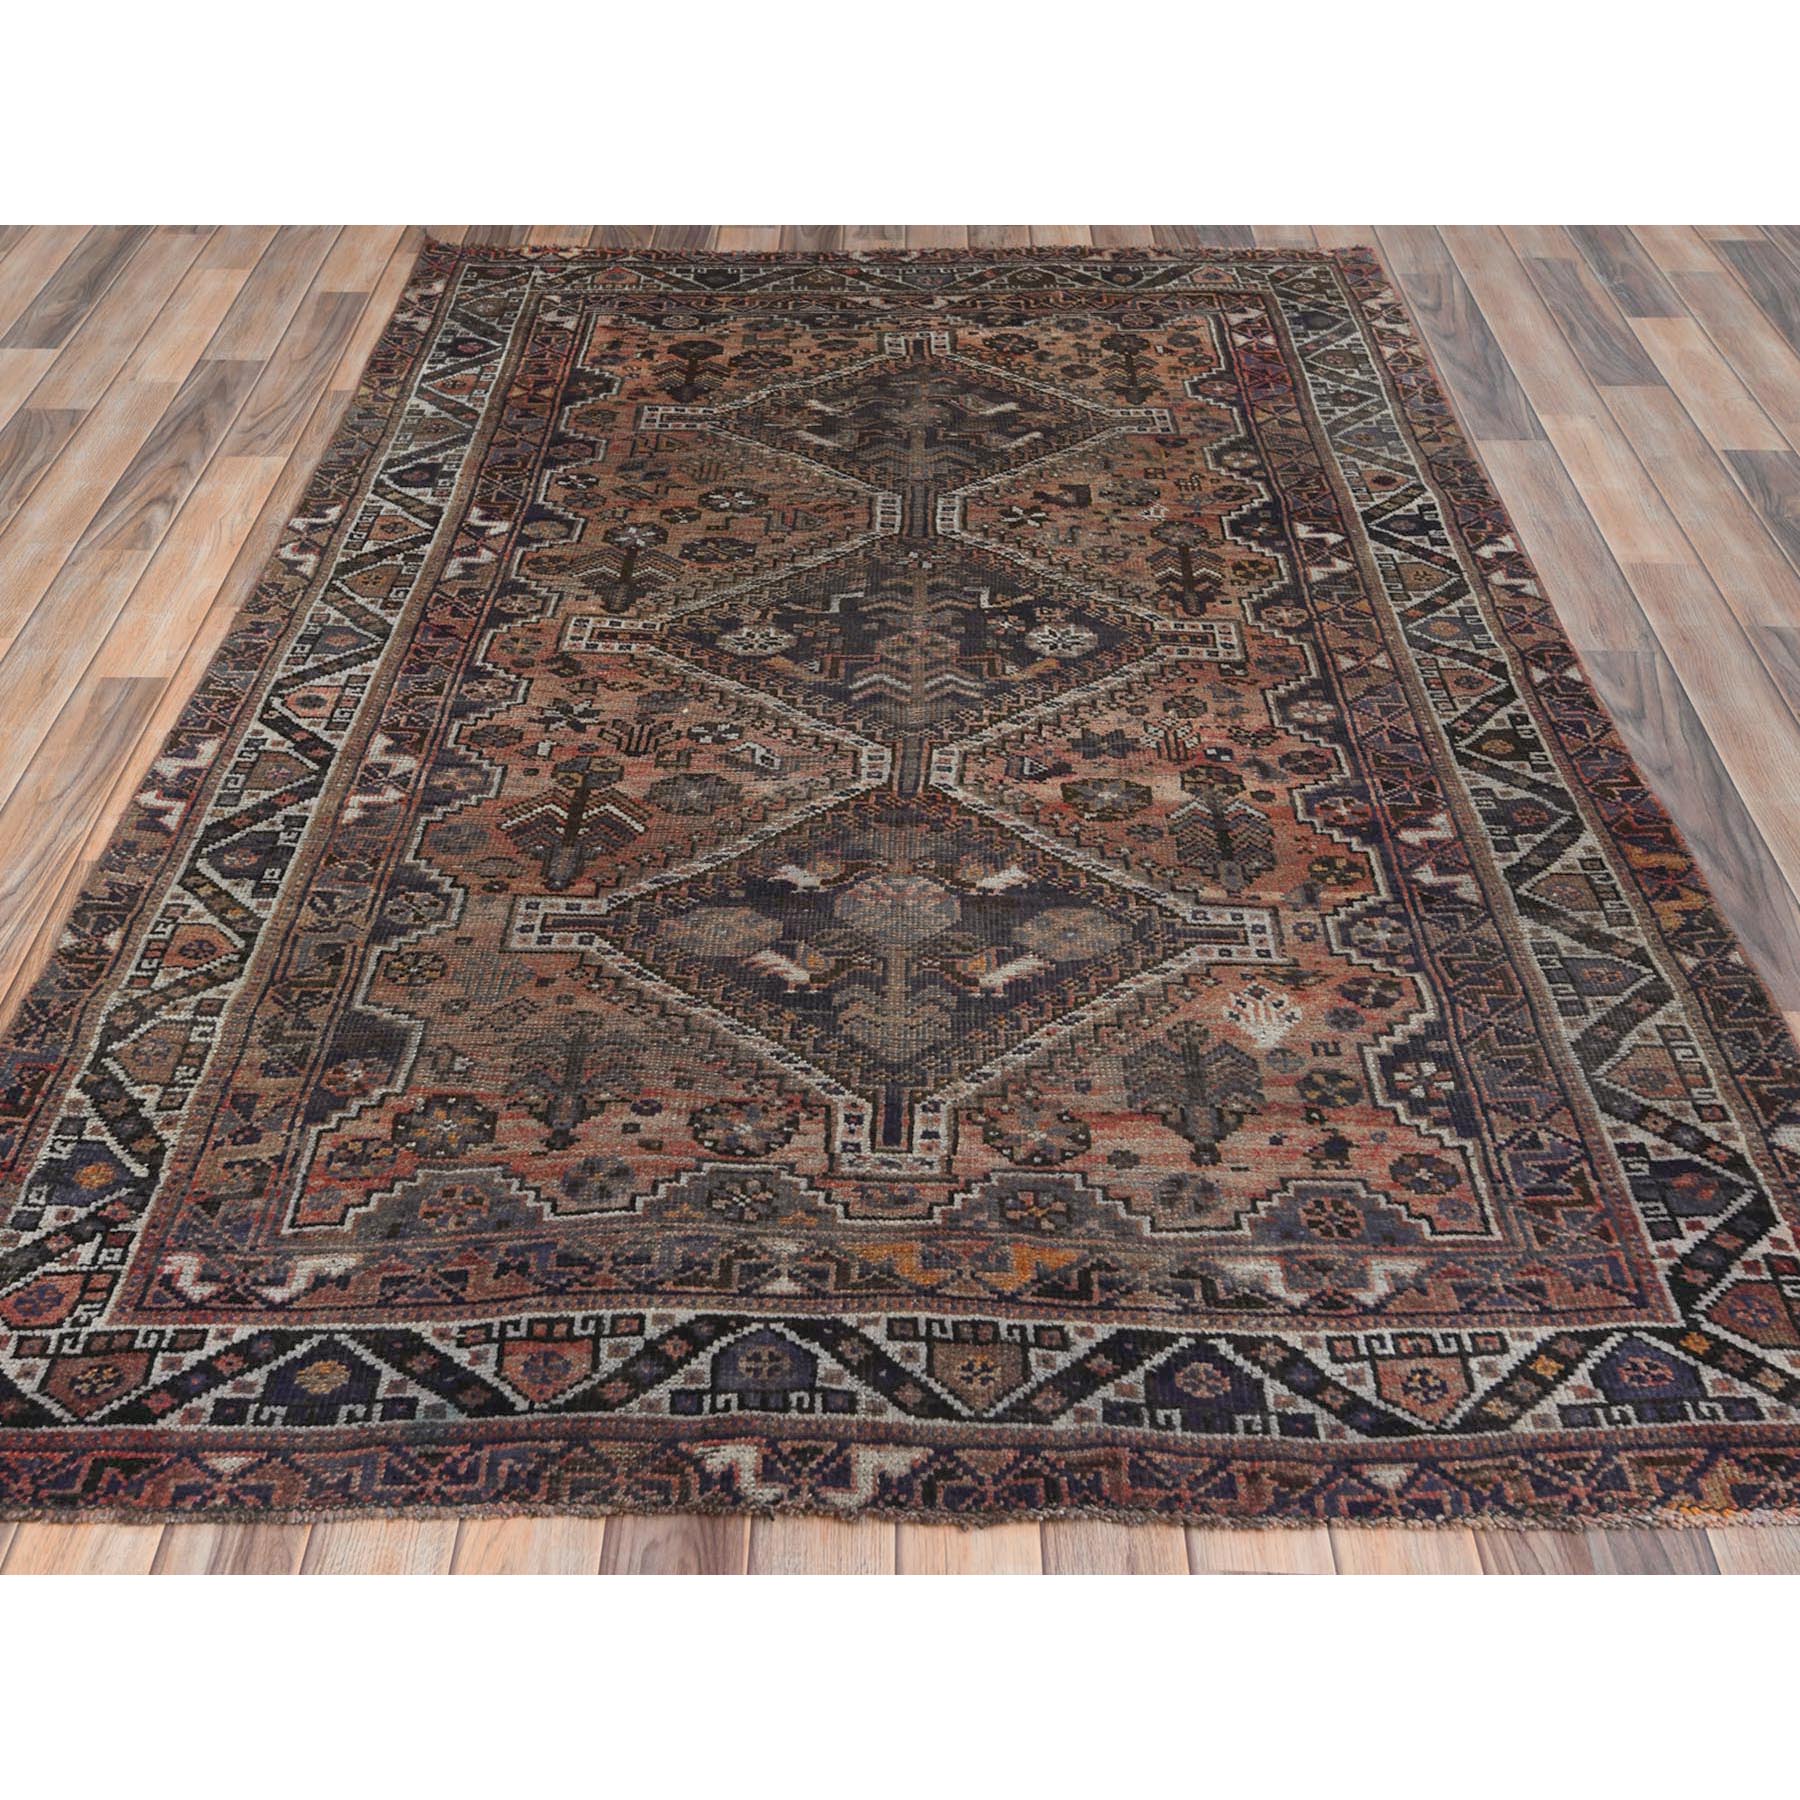 4'9"x6'9" Light Red Worn Down Vintage Persian Shiraz with Small Animal Figurines and Geometric Medallions Design, Hand Woven, Distressed Look Pure Wool Oriental Rug 